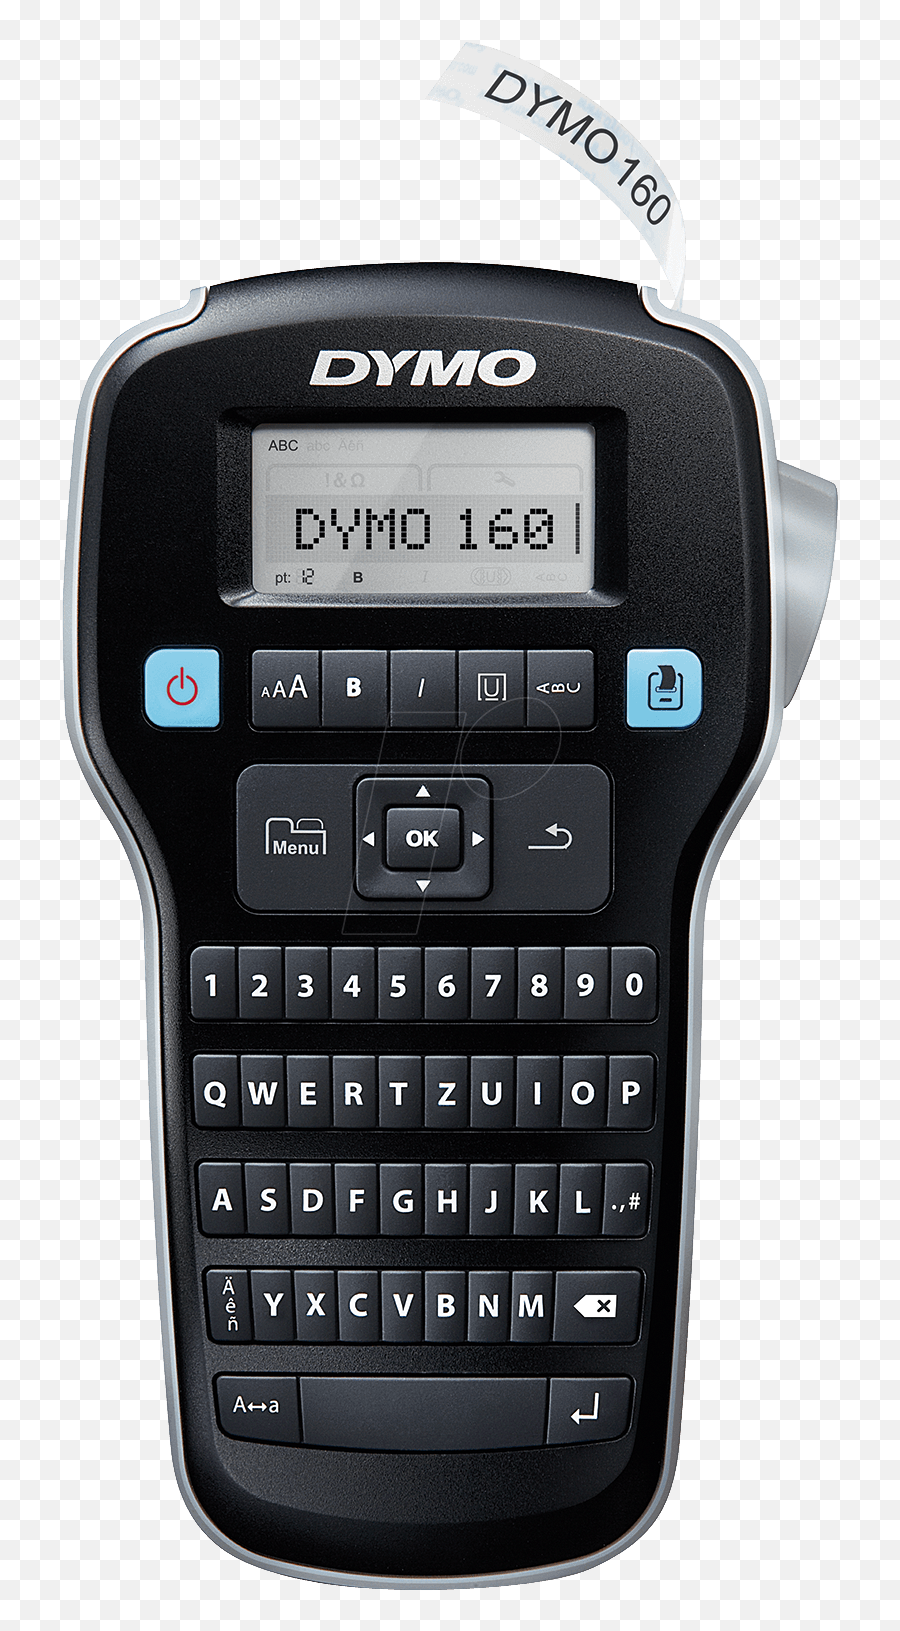 Dymo Lm 160 Dymo Labelling Machine - Portable At Reichelt Dymo Label Manager 160 Emoji,Label Maker With Emojis